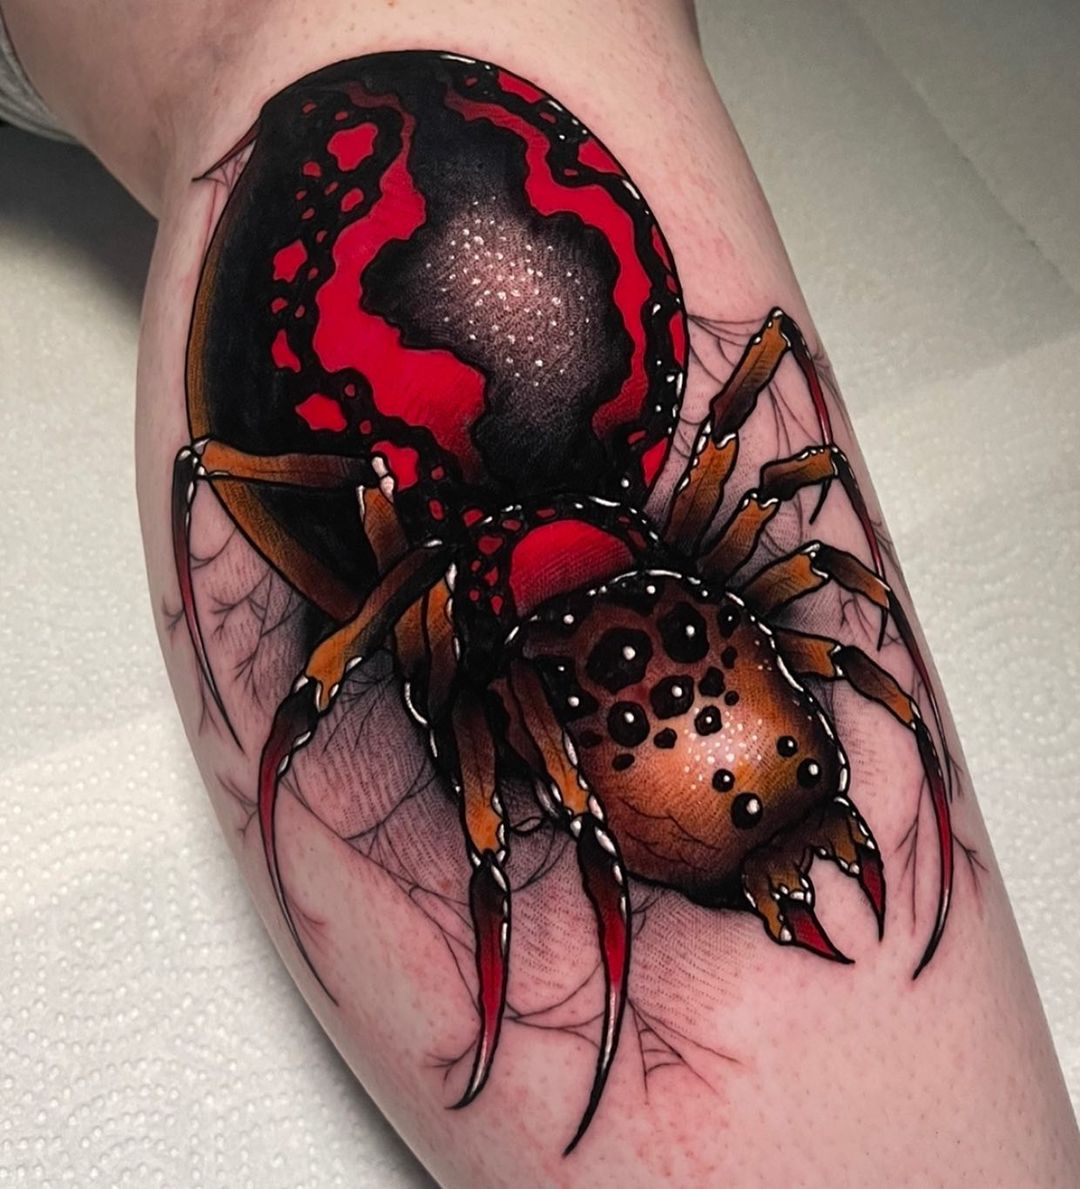 Traditional tattoo style spider